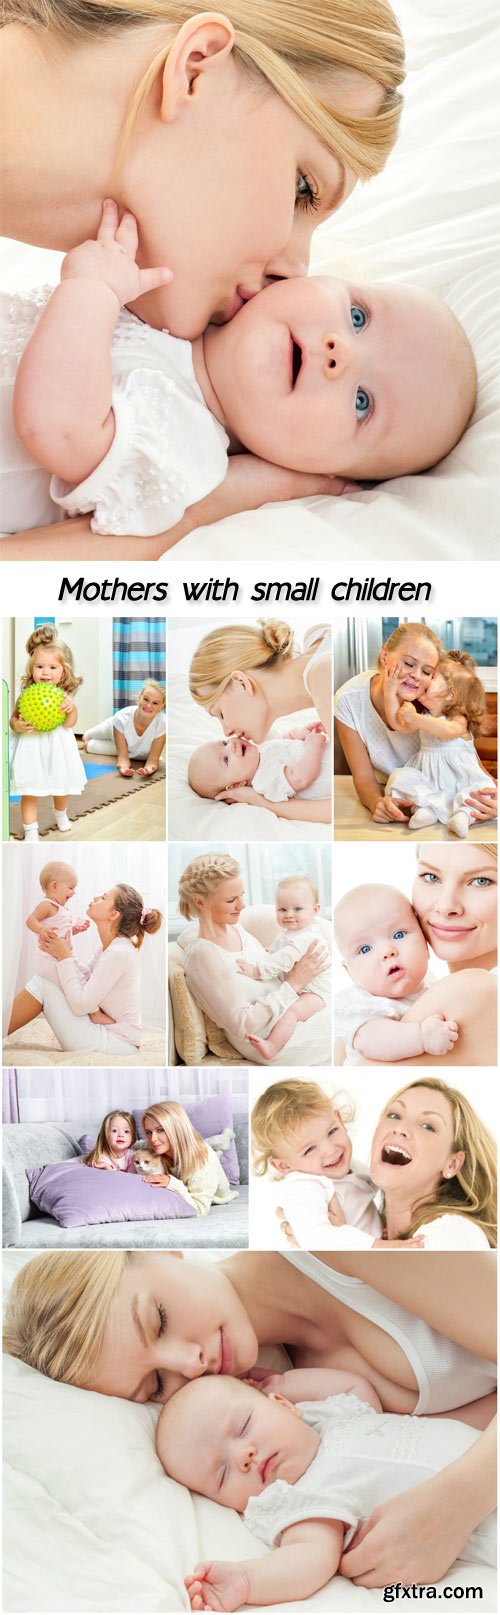 Young mothers with small children